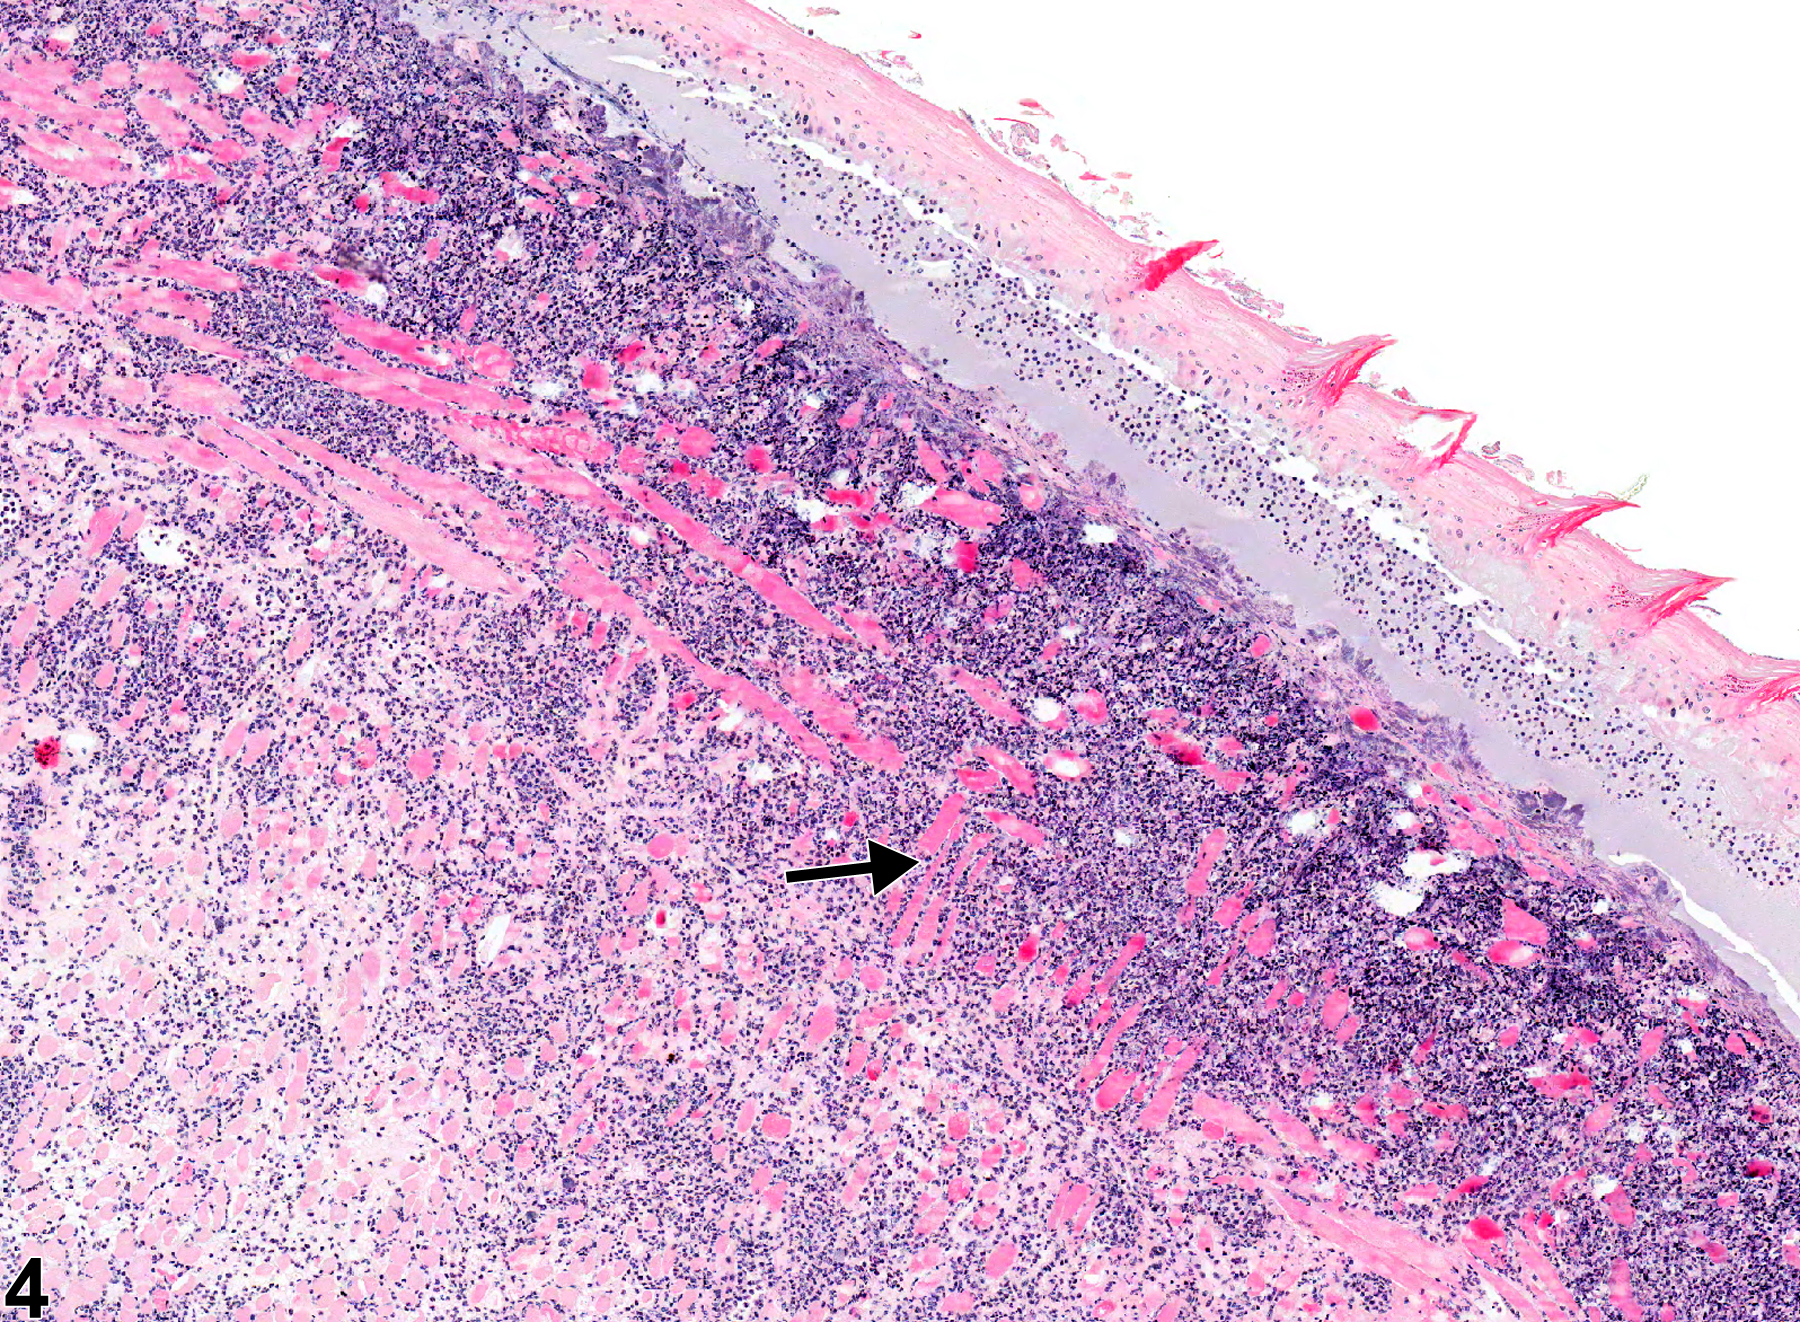 Image of necrosis in the tongue from a male Swiss CD-1 mouse in a chronic study